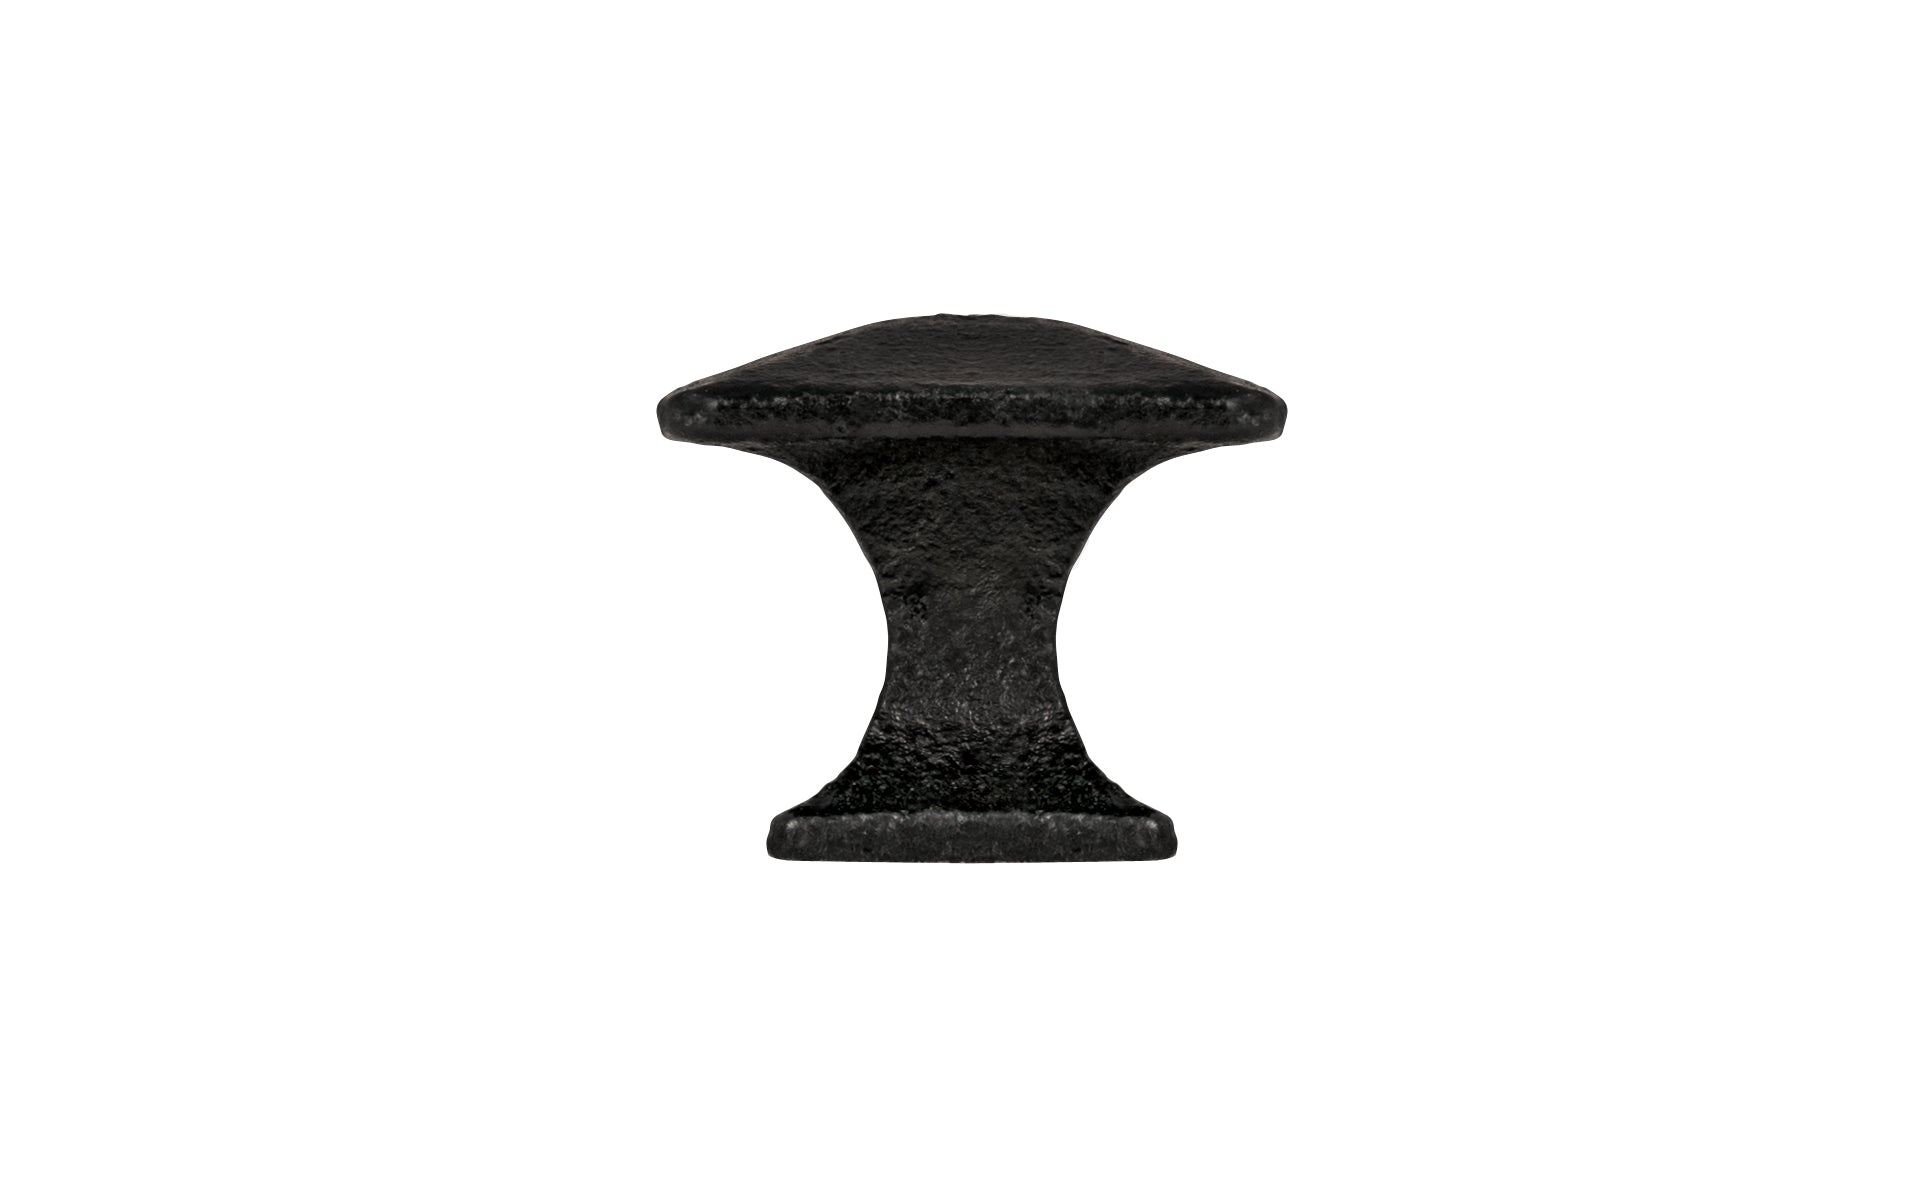 A rustic-looking & attractive black cast iron pyramid style cabinet knob ~ 1" size. Designed in the Mission / Arts & Crafts style style hardware, The square knob works well in kitchens, bathrooms, on furniture, cabinets, drawers. Made of cast iron material with a satin black color. 1" x 1" size. Reproduction Hardware. 